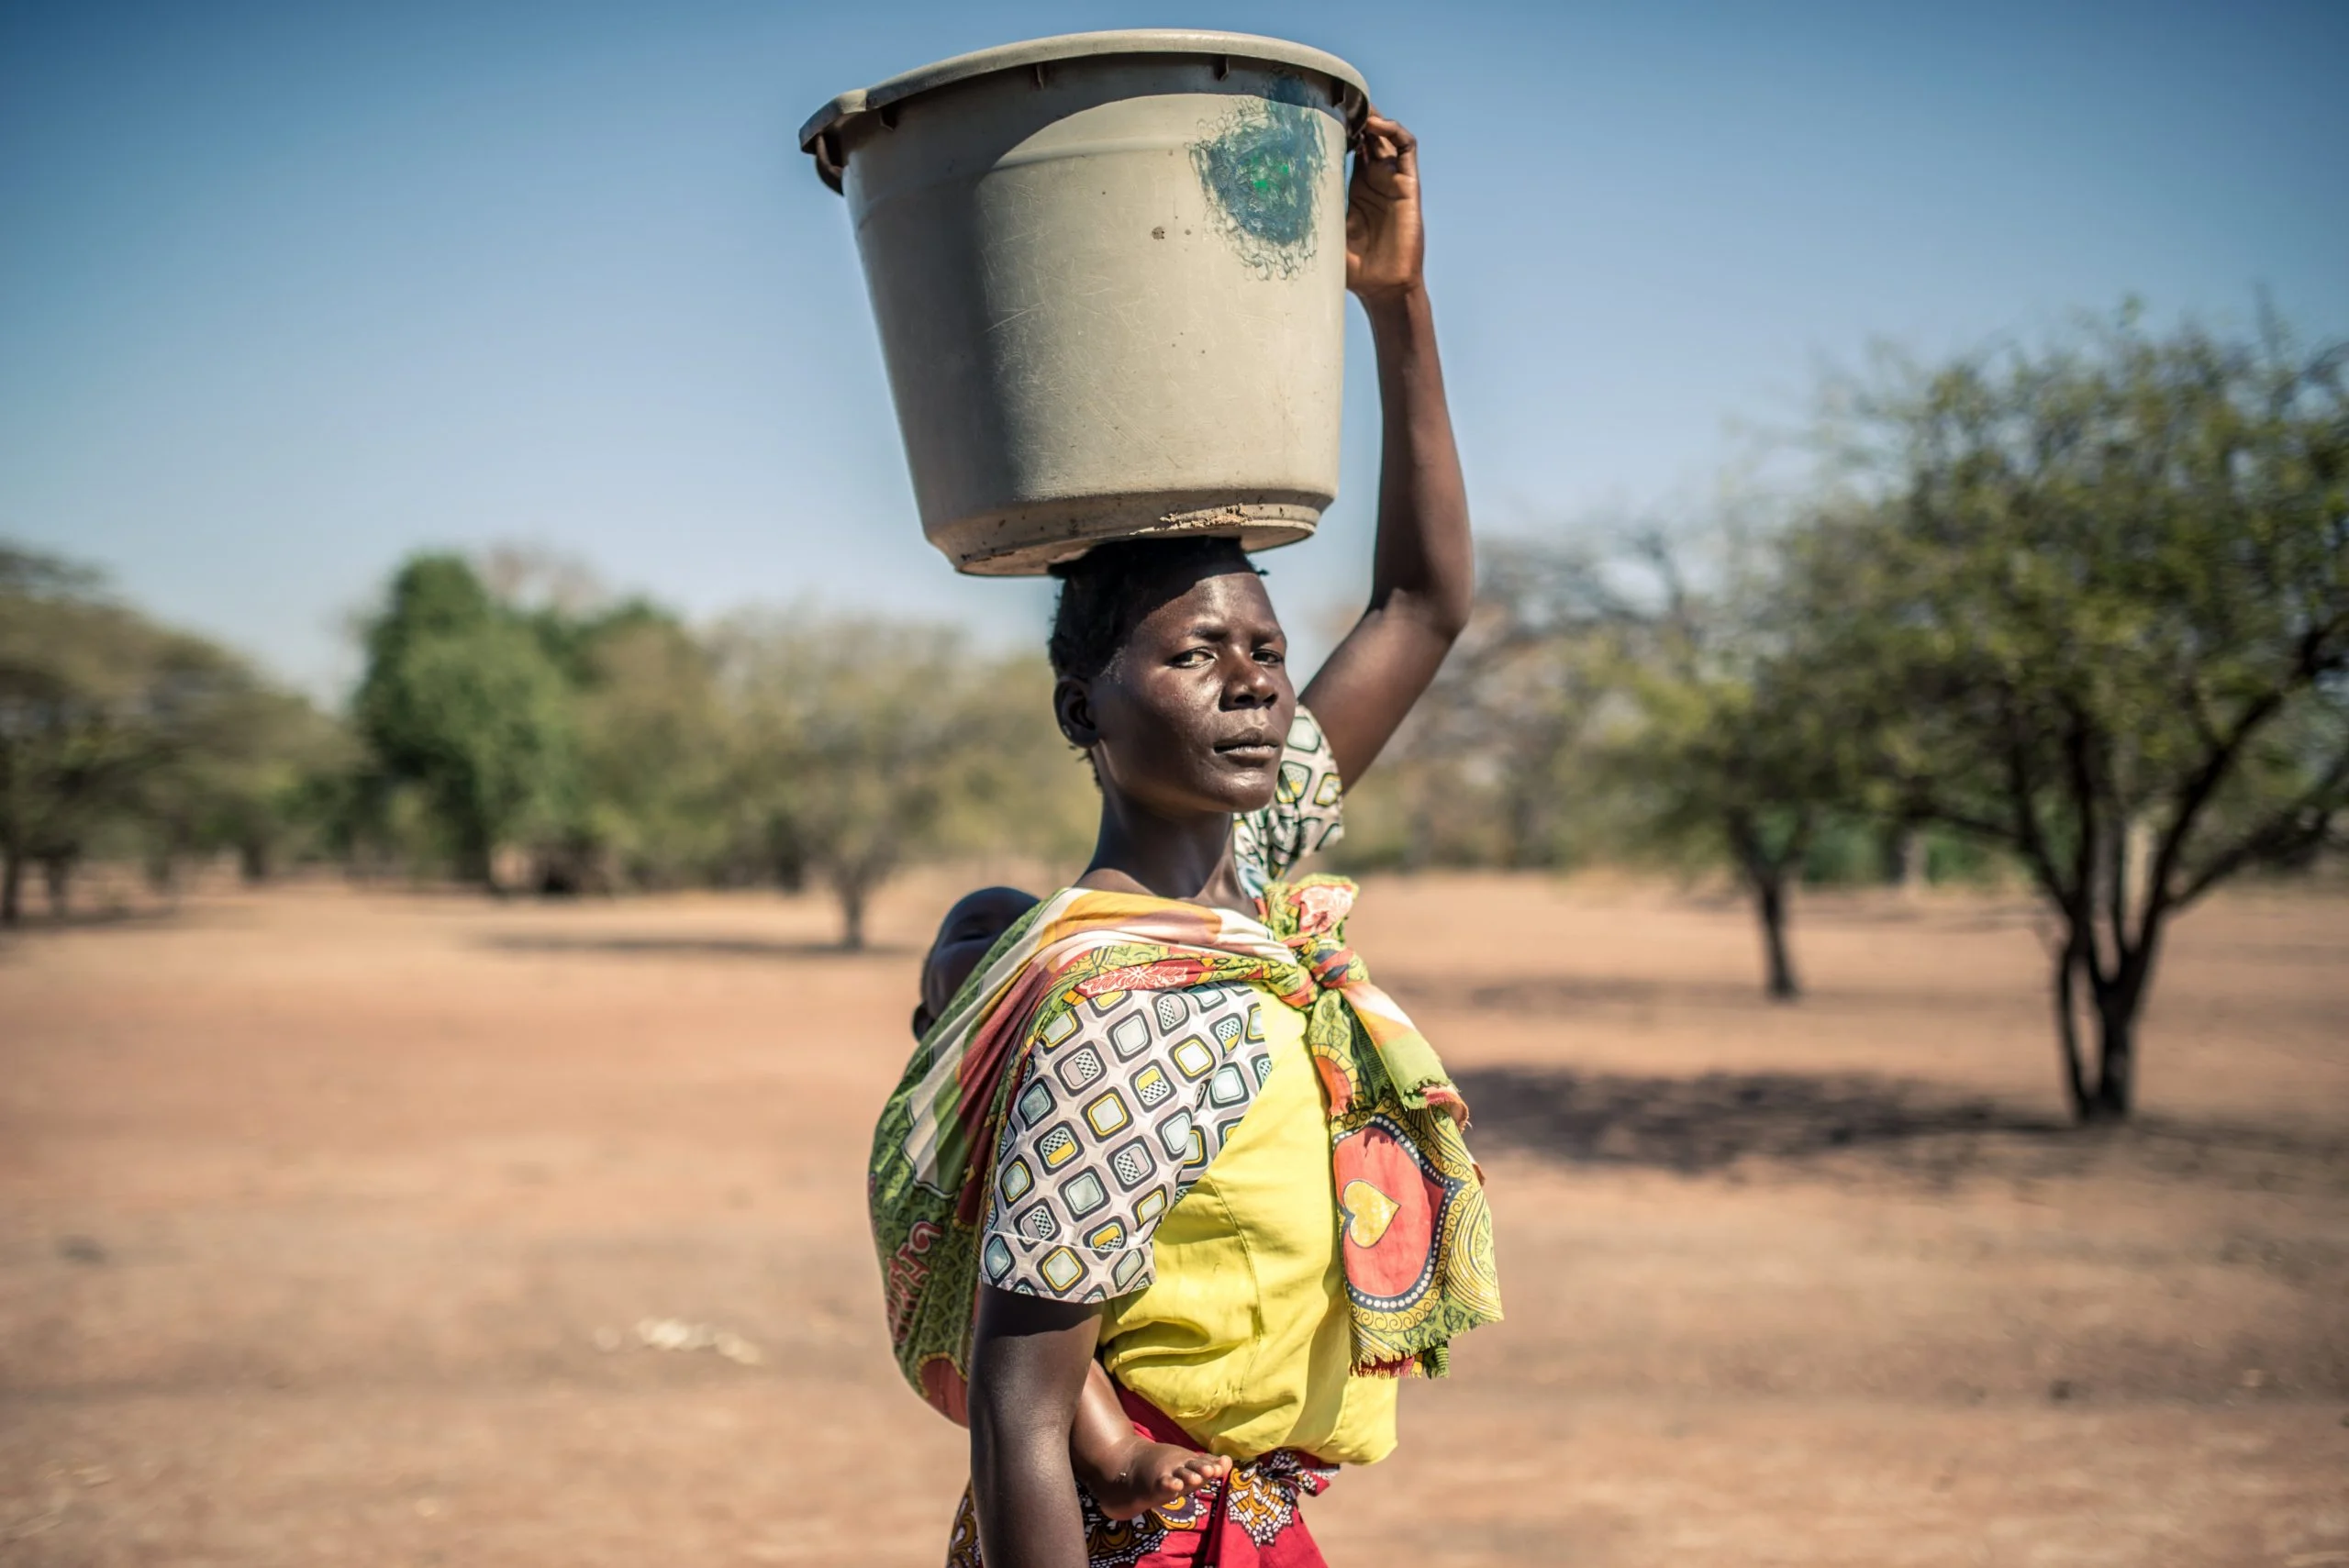 Blantyre Rural, Malawi: Elube (32) walks to collect water for her family. Elube's family has been severely affected by the drought and she now has to walk very far to find water. Photo: Aurelie Marrier d'Unienville/Oxfam AUS